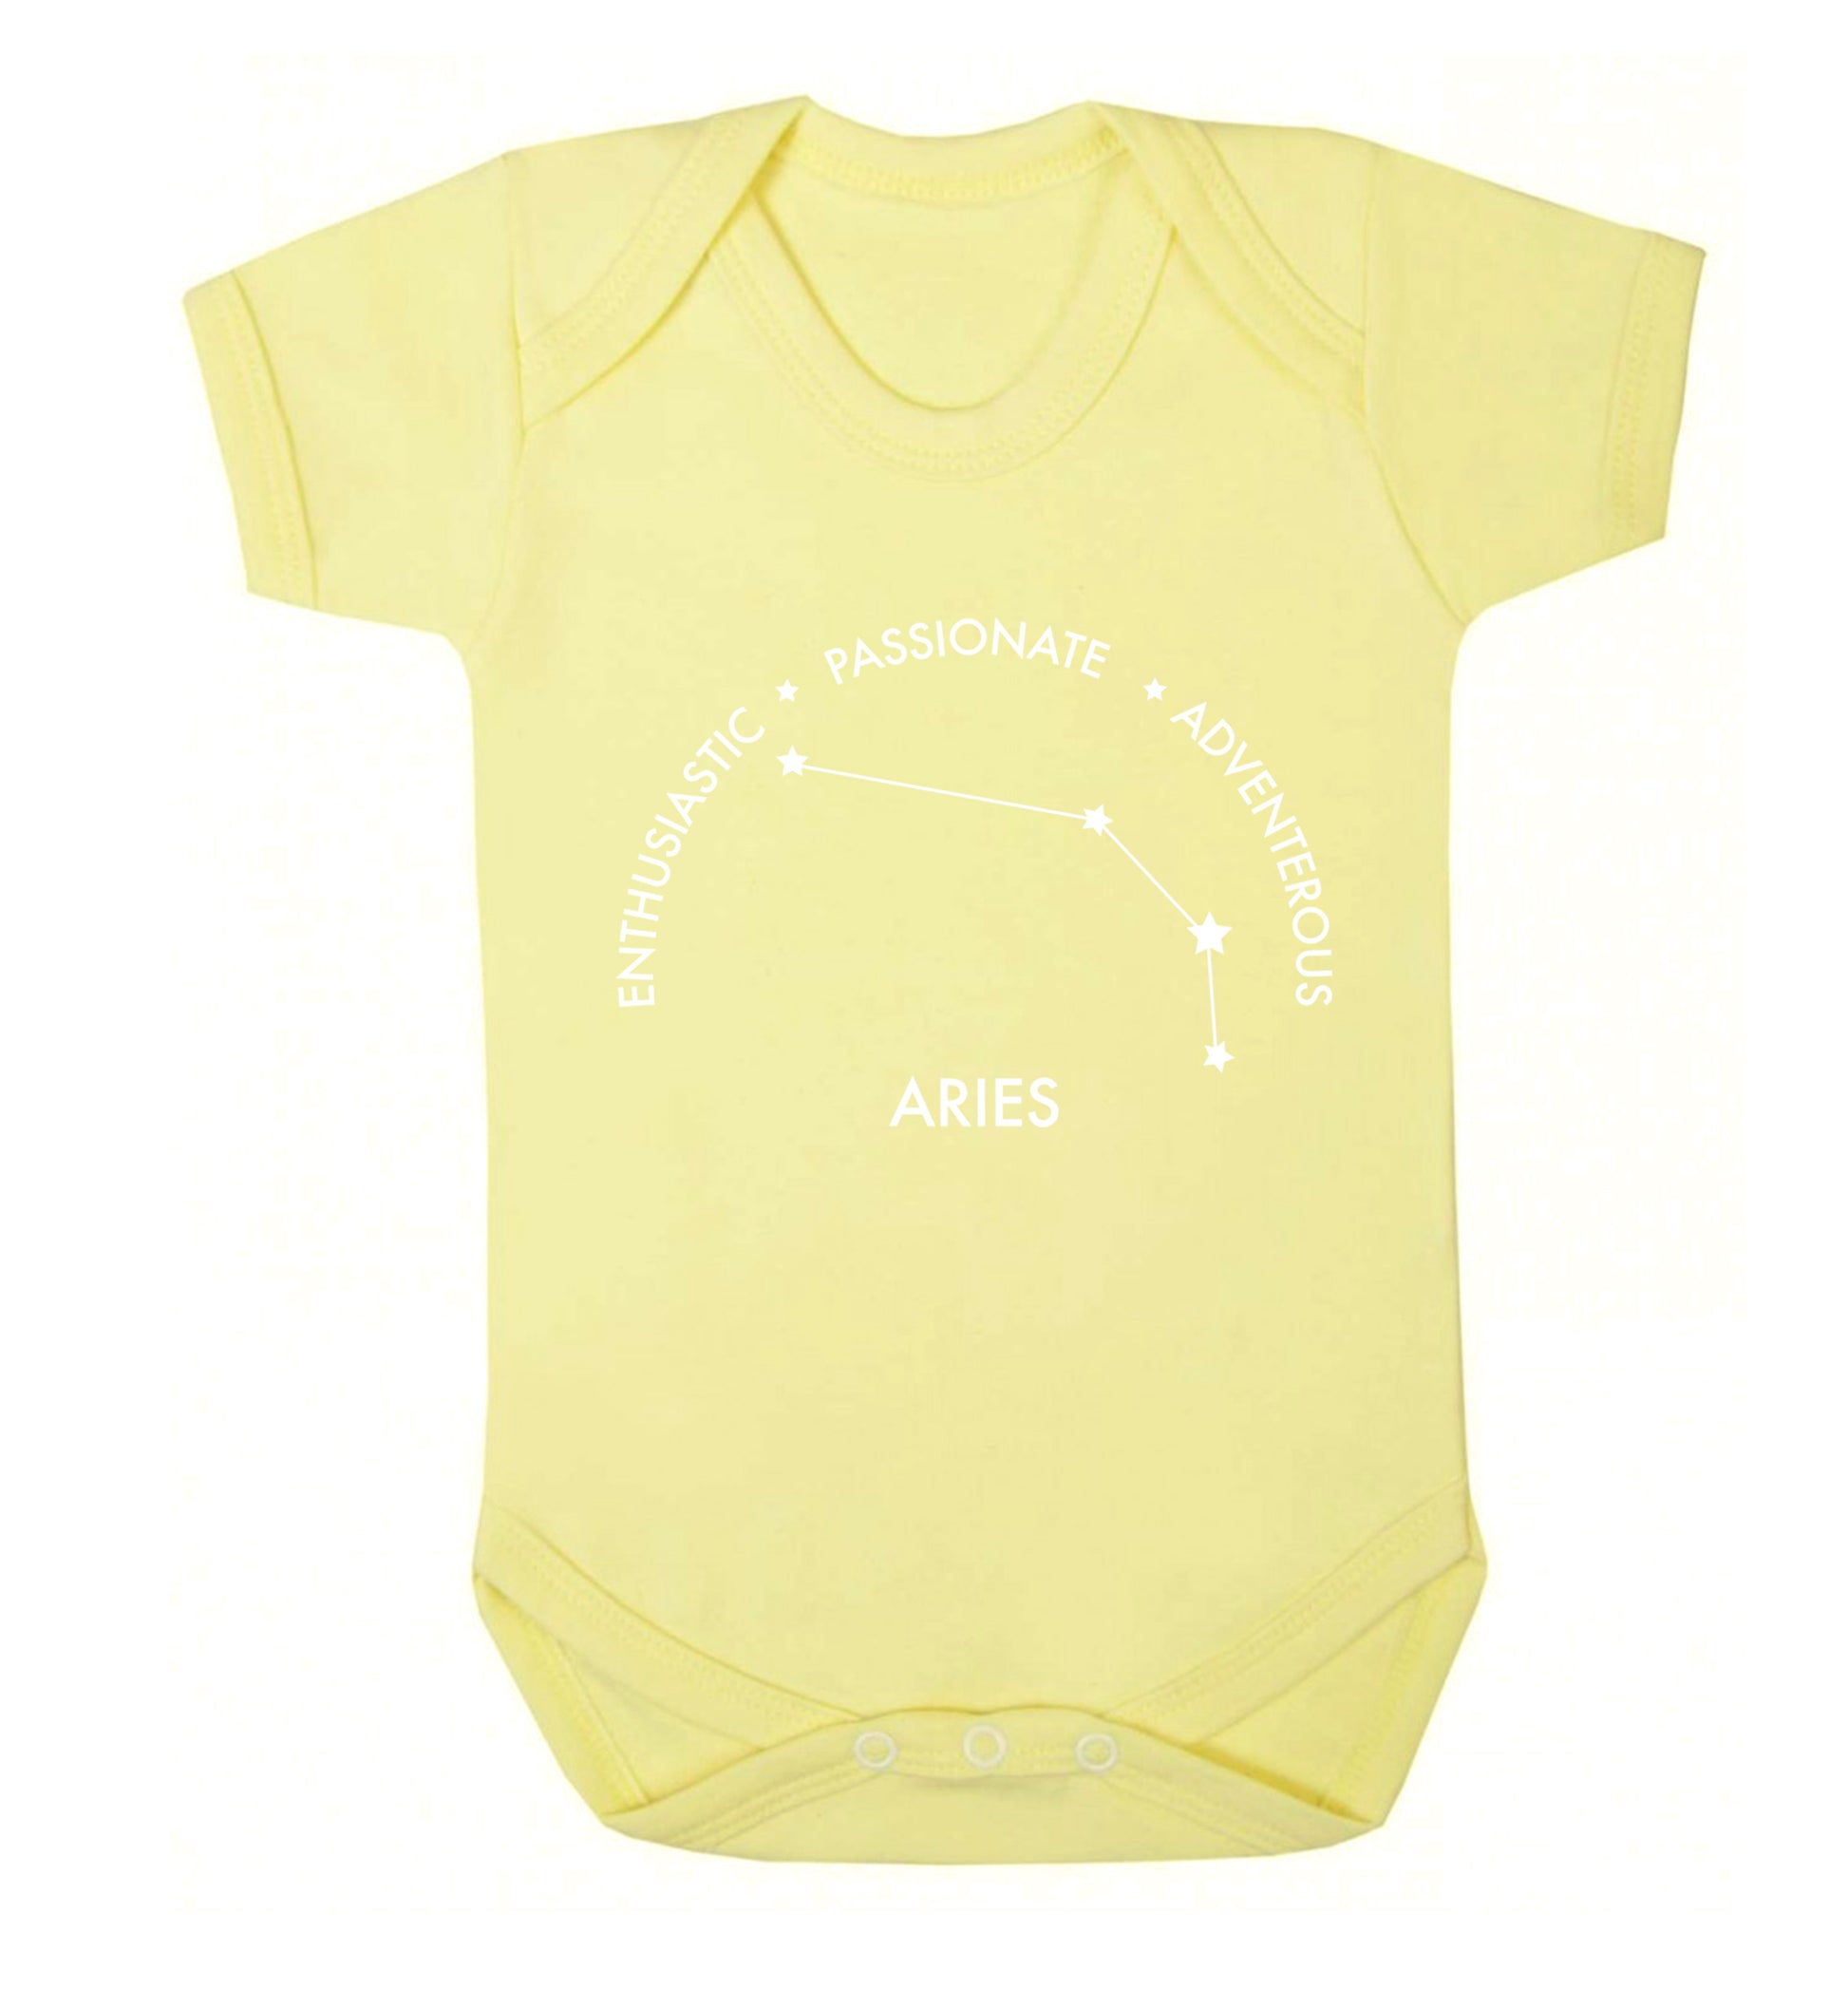 Aries enthusiastic | passionate | adventerous Baby Vest pale yellow 18-24 months